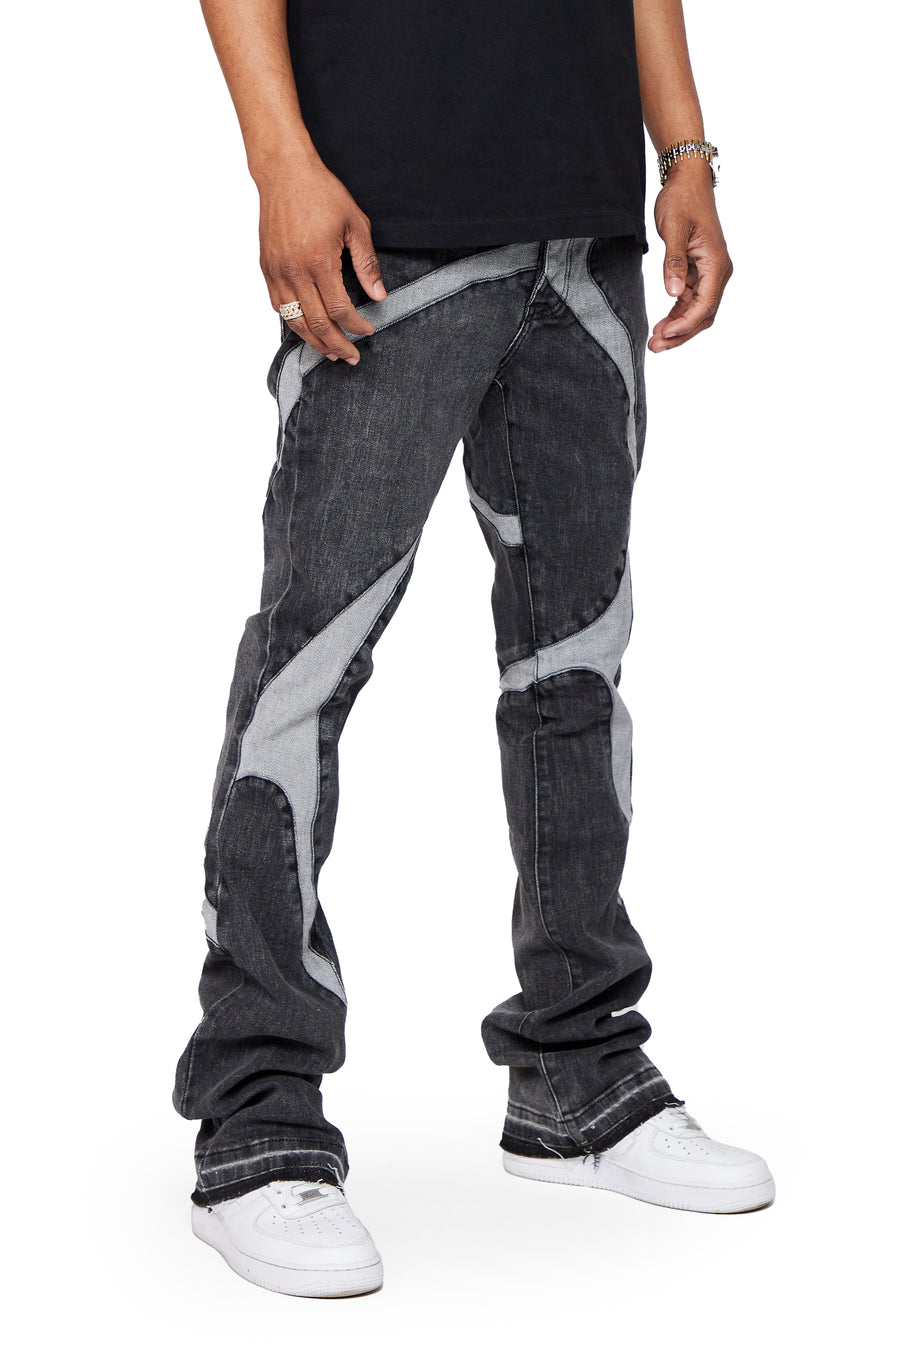 “WILDER” GREY WASHED STACKED FLARE JEAN